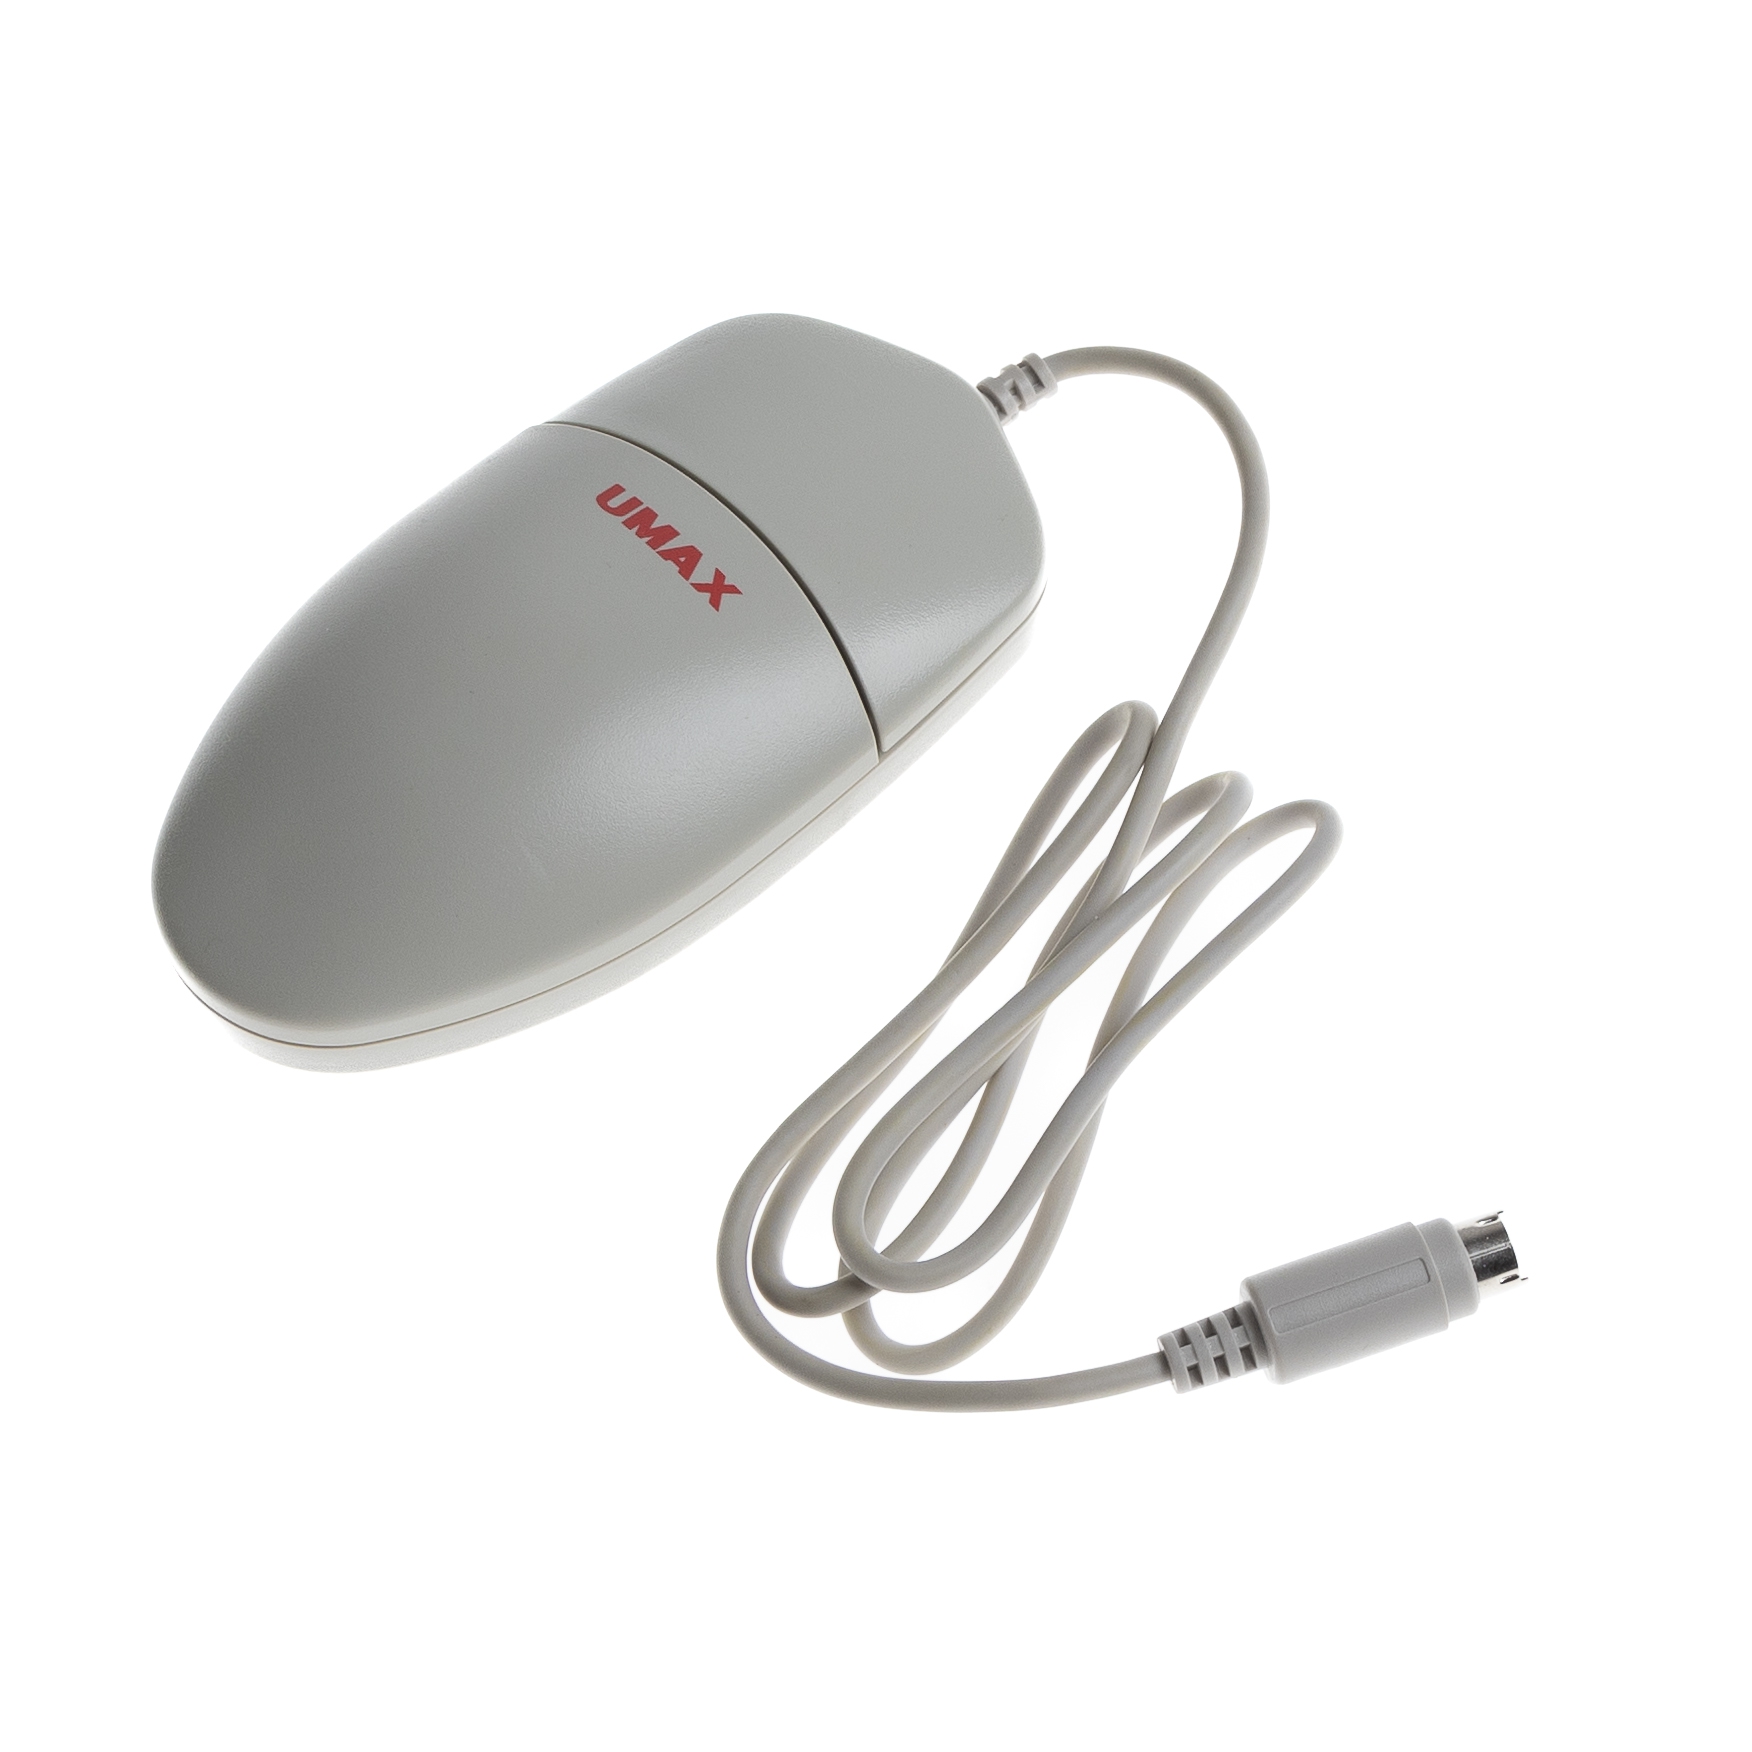 Single button mouse for old APPLE computers, ADB compatible